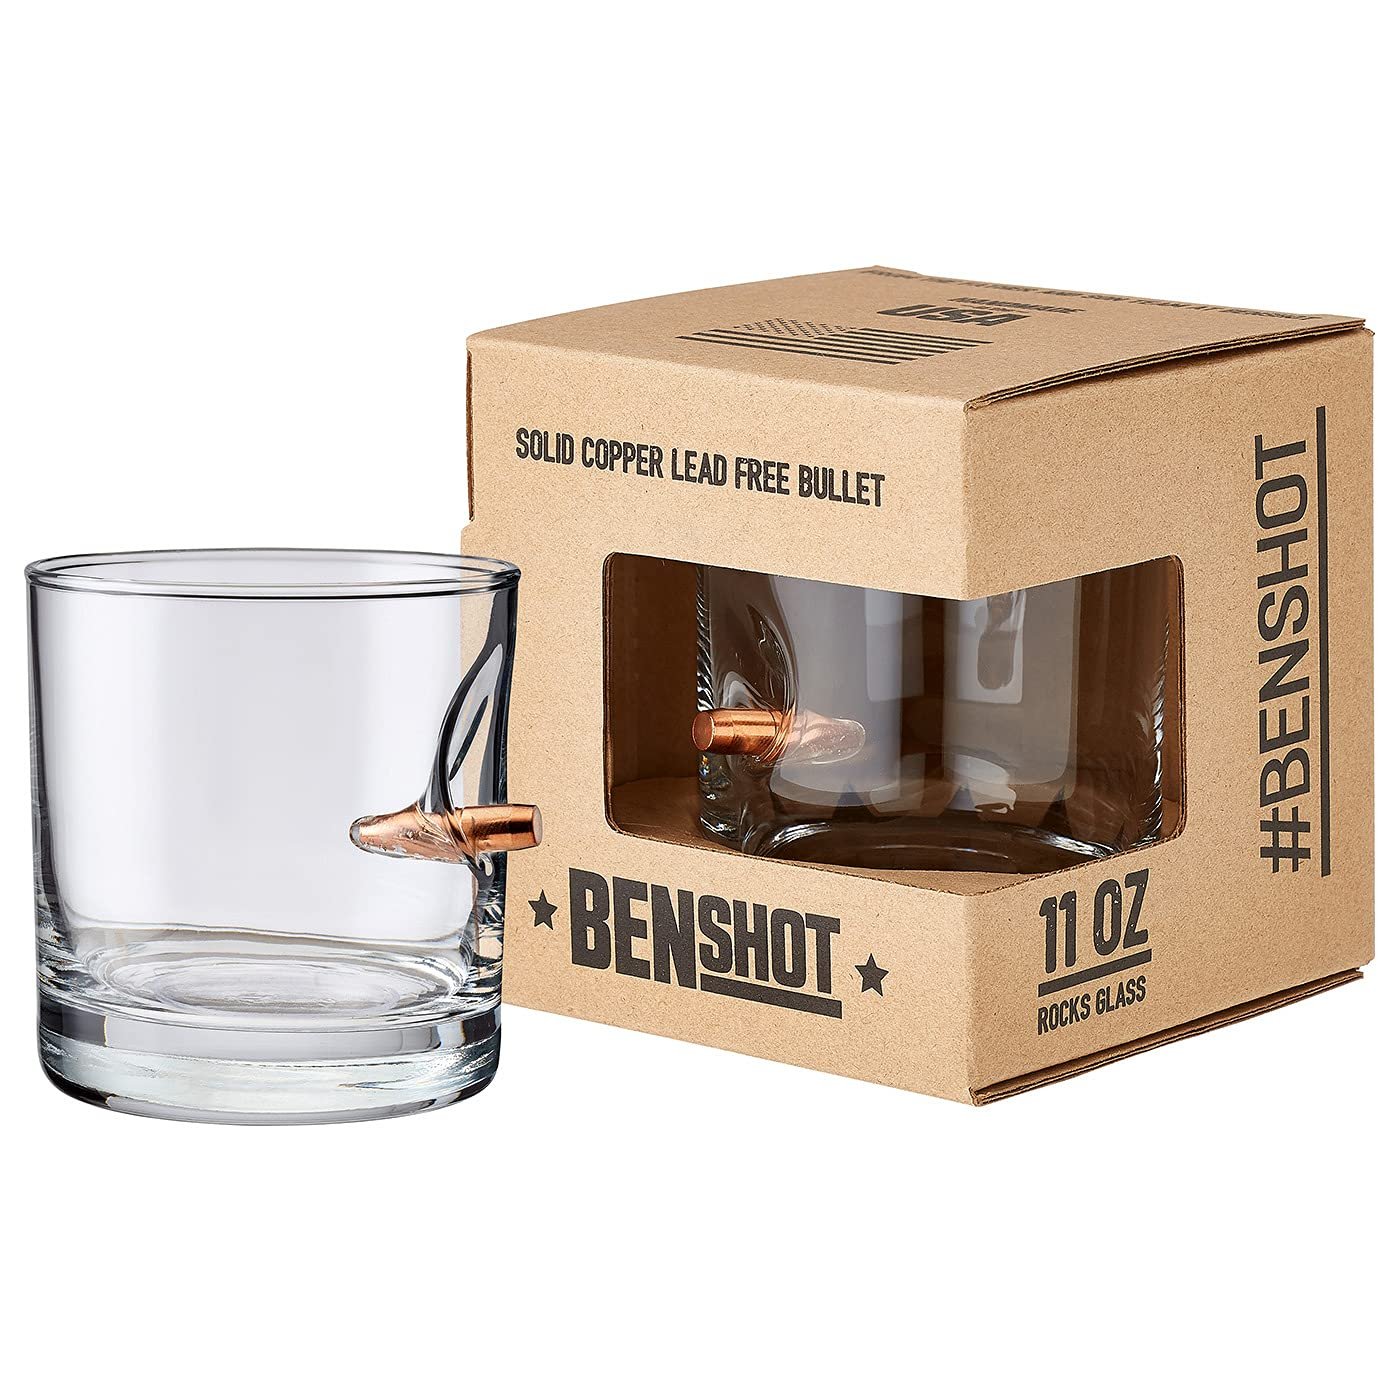 BenShot Rocks Glass with Real .308 Bullet - 11oz | Made in the USA